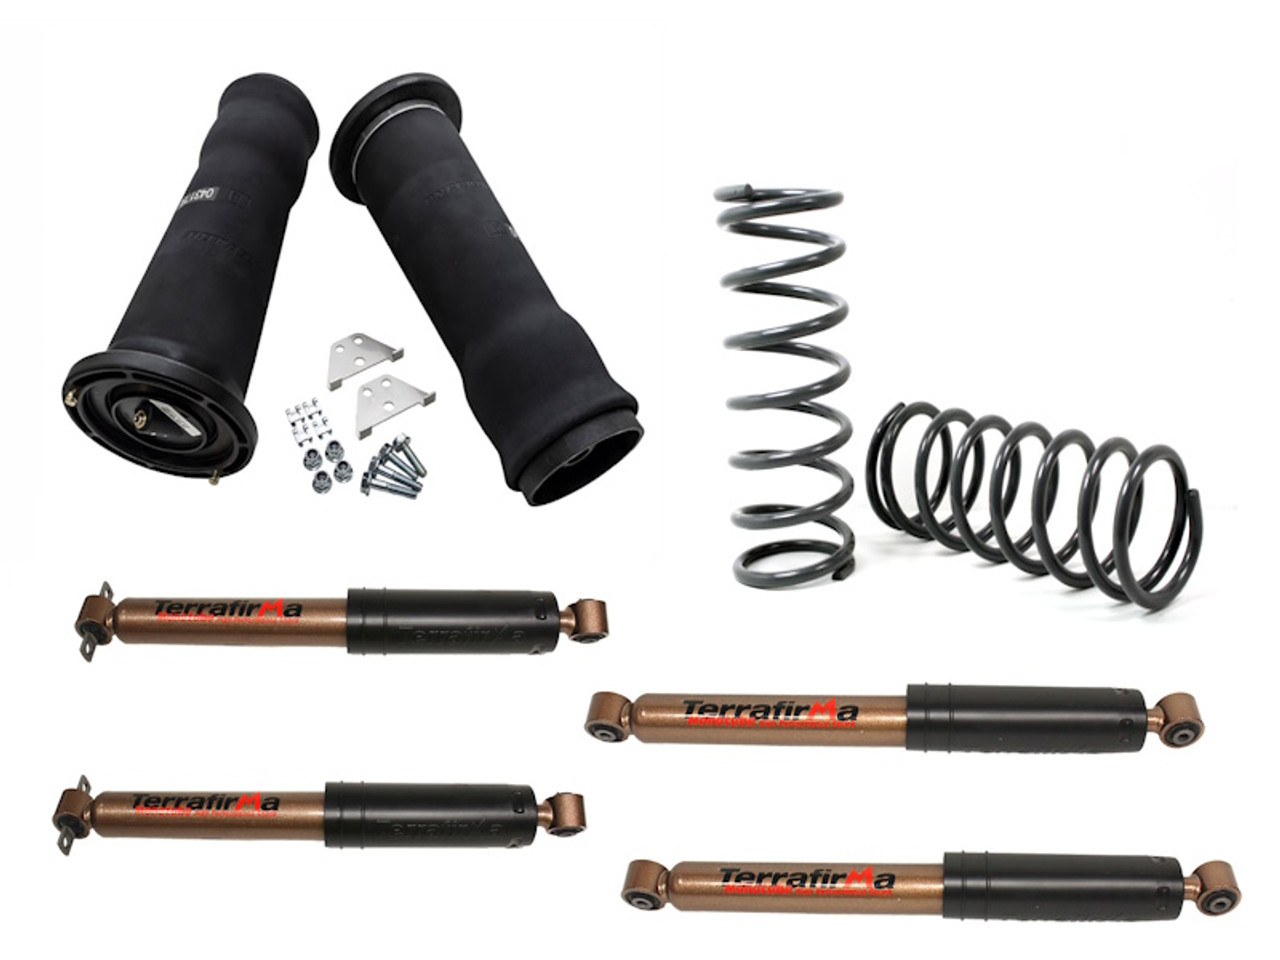 Discovery 2 Monotube Adjustable Air Suspension Model Plus 50mm Lift Kit